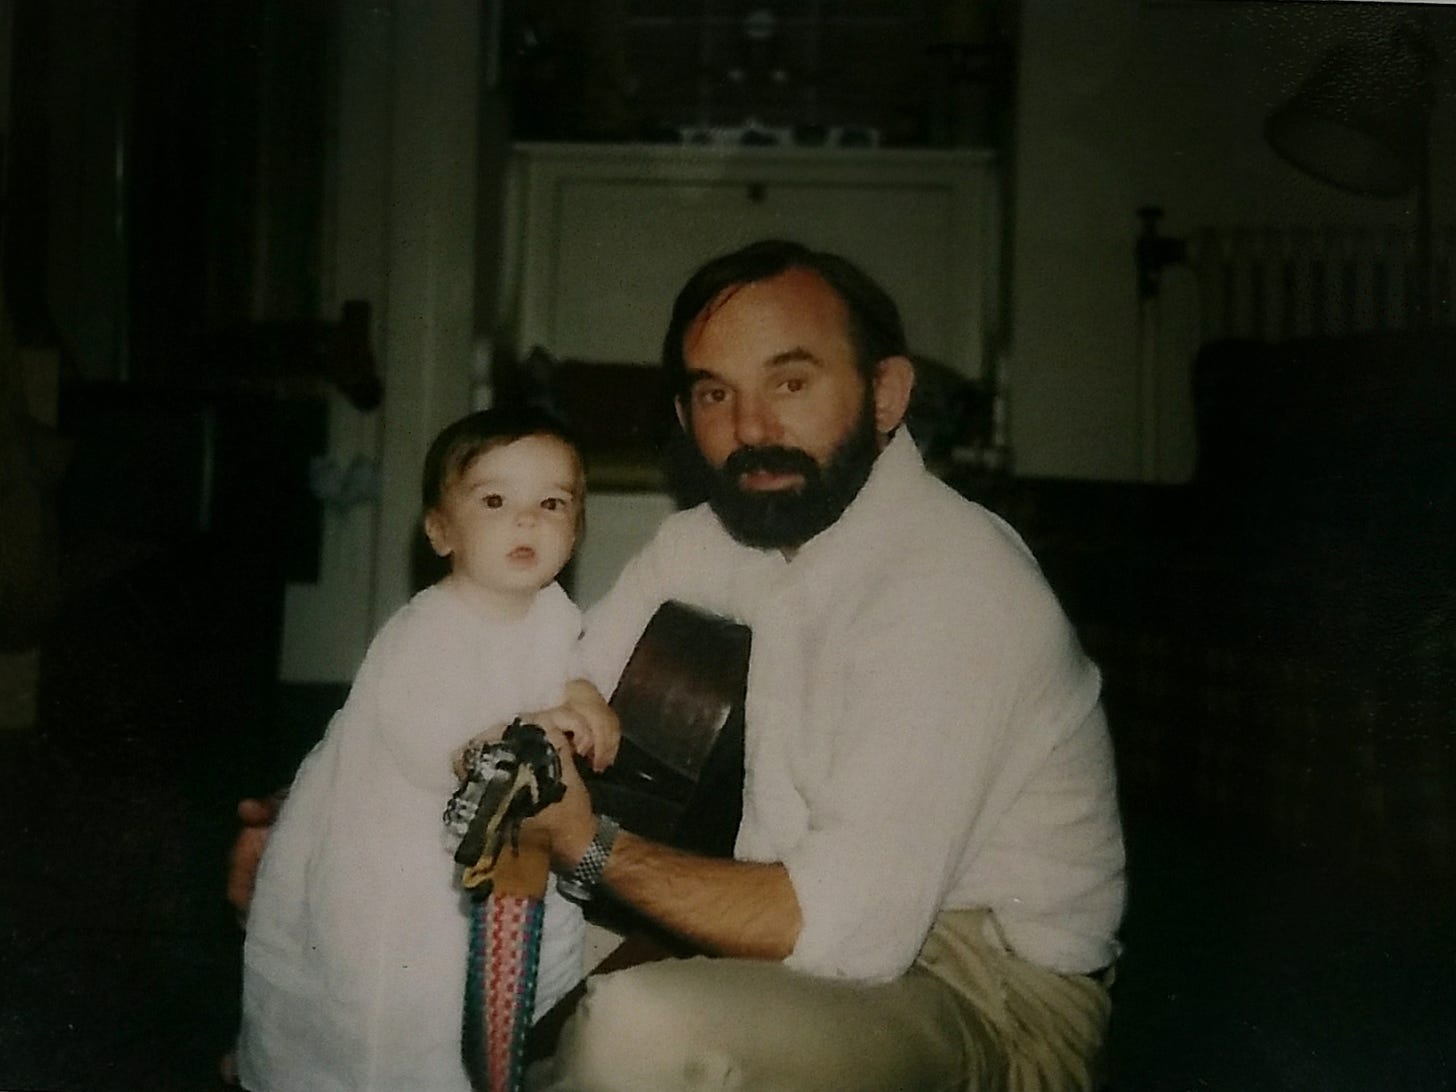 A small white child in a long pale garment stands in 3/4 view on the left. The child is holding onto the neck of a guitar being held by a man squatting on the right. He is white, too, with a beard and dark hair.